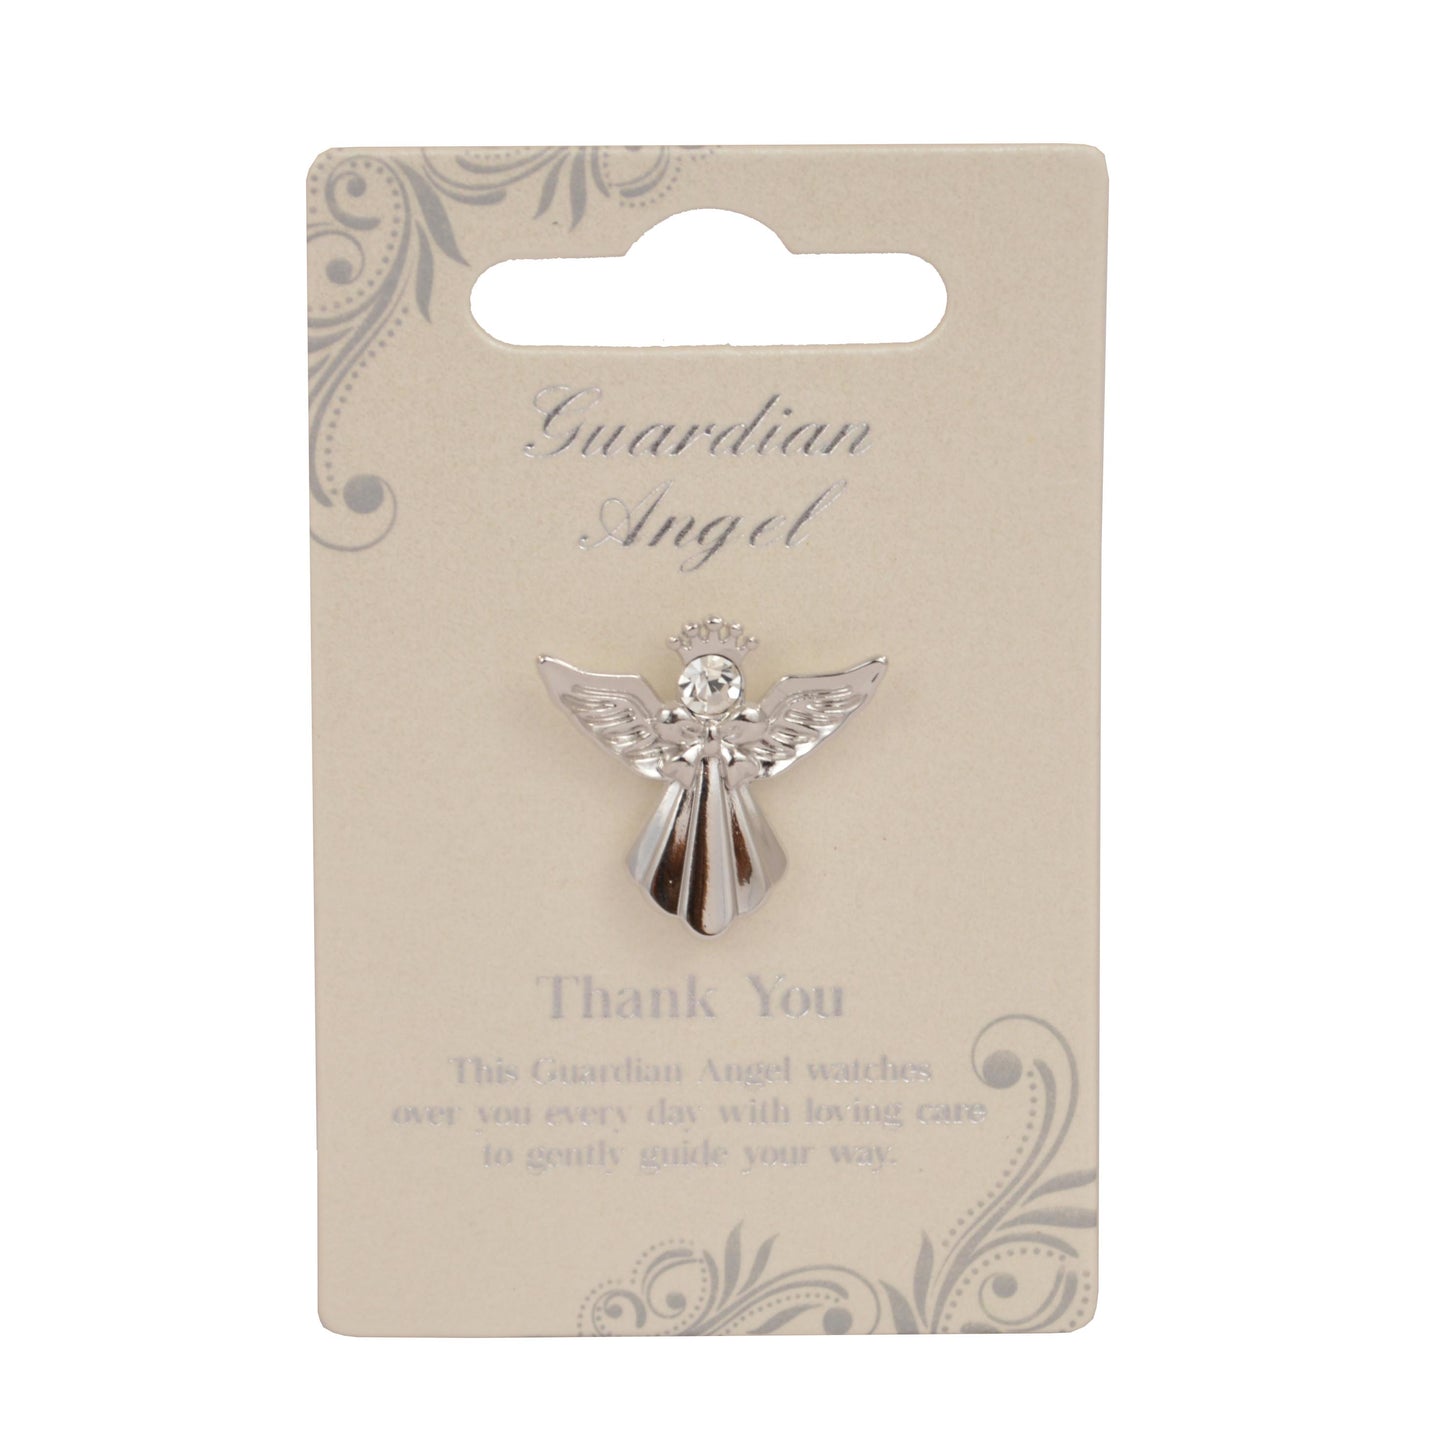 Thank You Guardian Angel Silver Coloured Angel Pin With Gem Stone